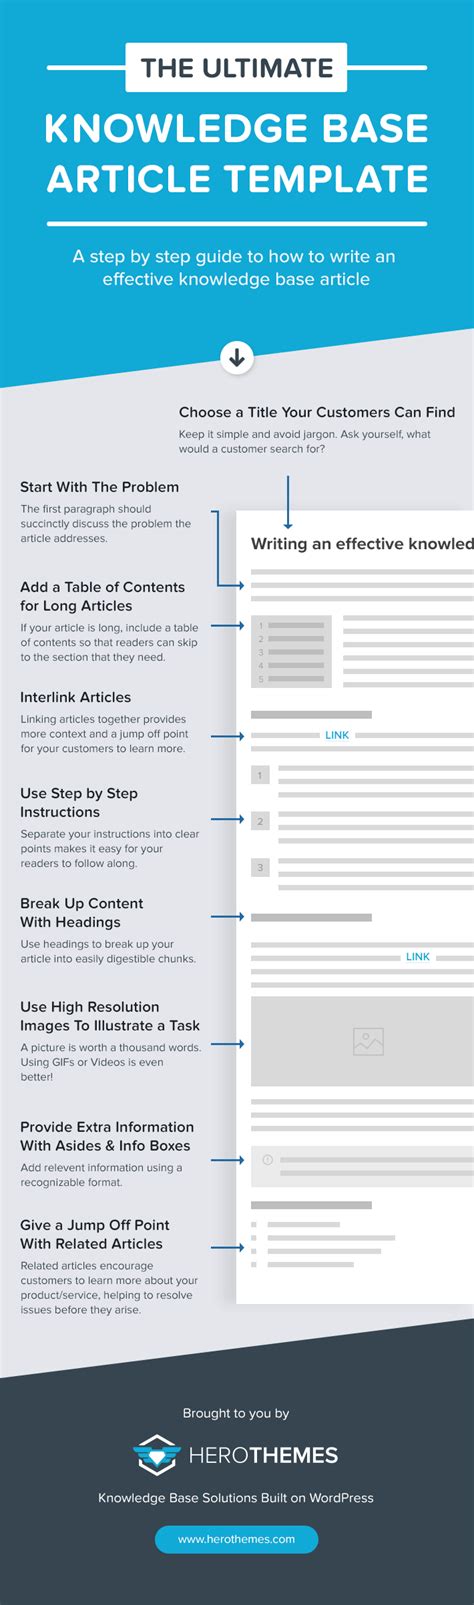 The Ultimate Knowledge Base Article Template Infographic